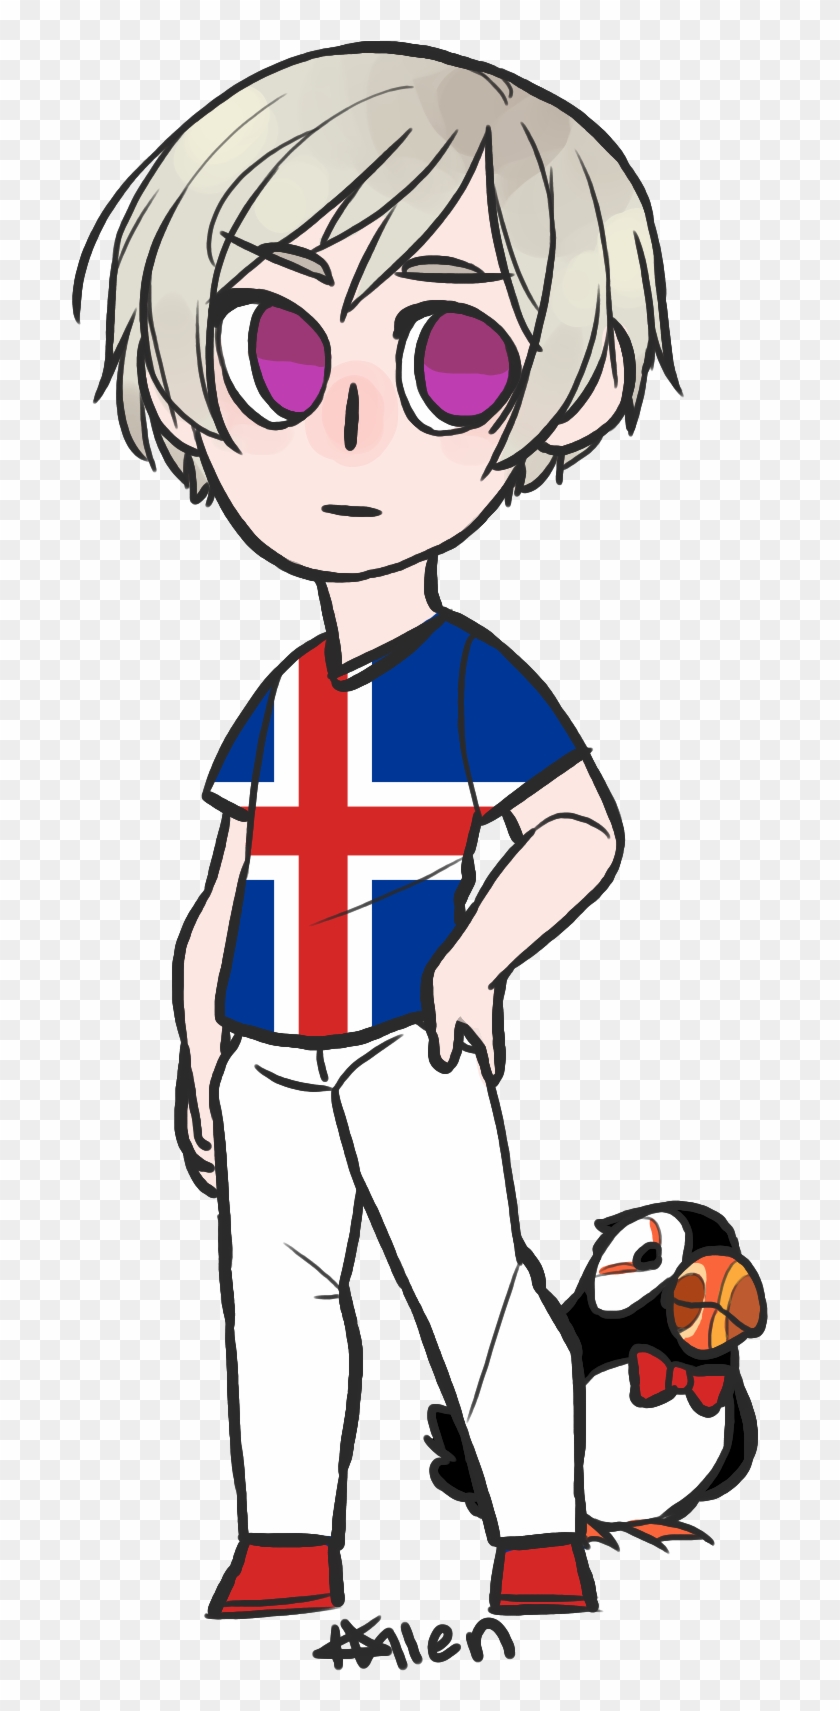 Aph Iceland - Iceland #1362765